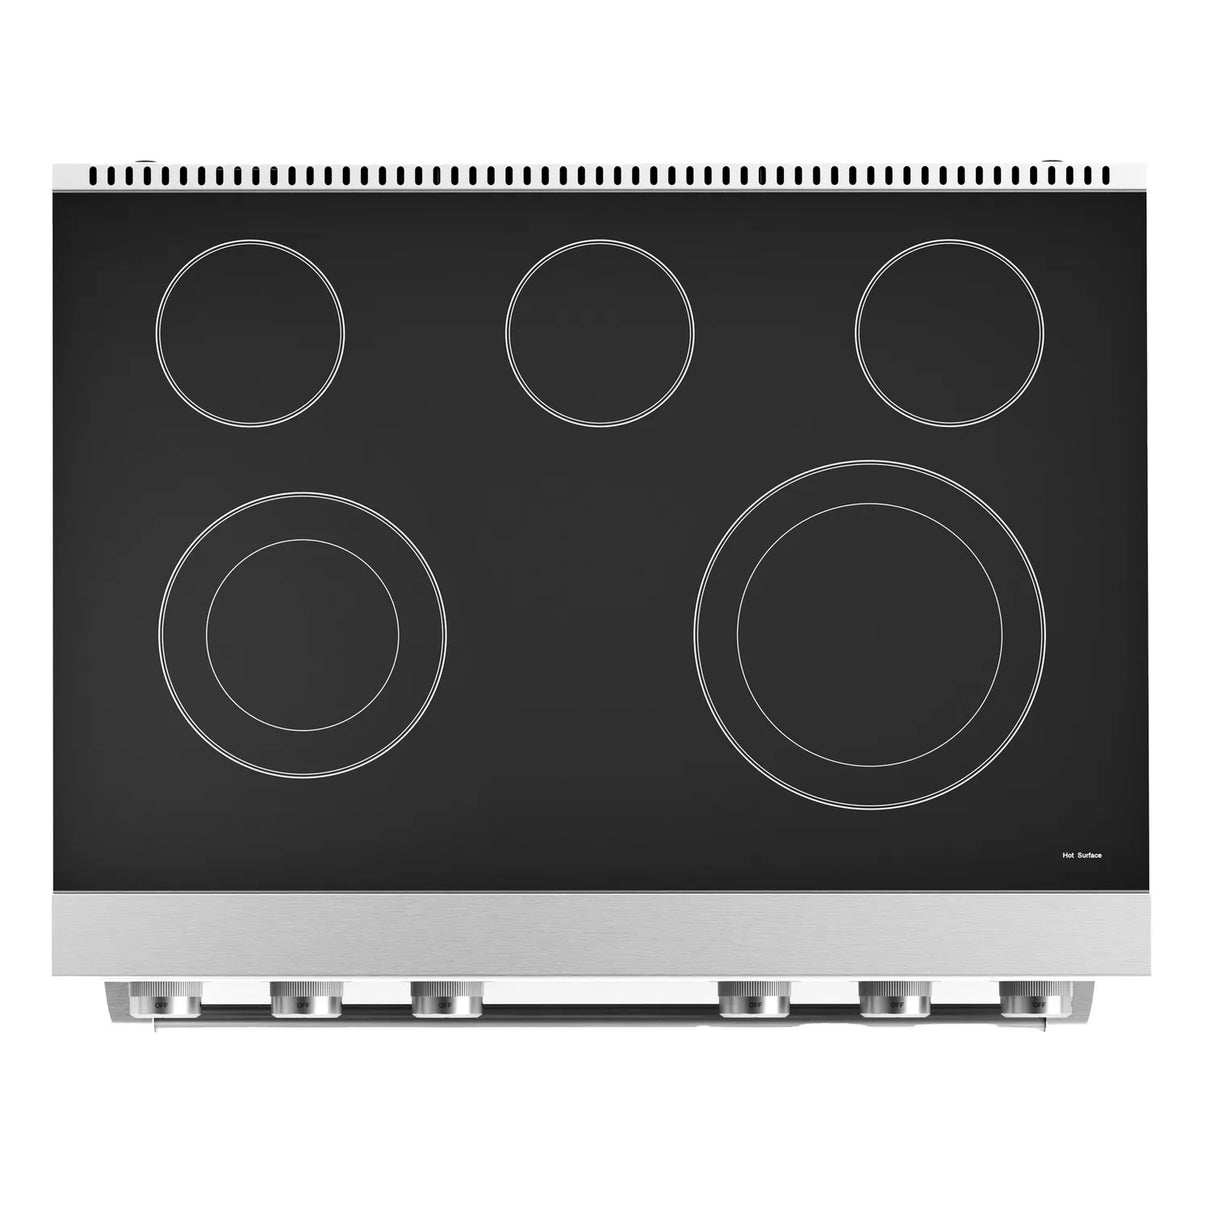 THOR 36 Inch Contemporary Professional Electric Range – ARE36